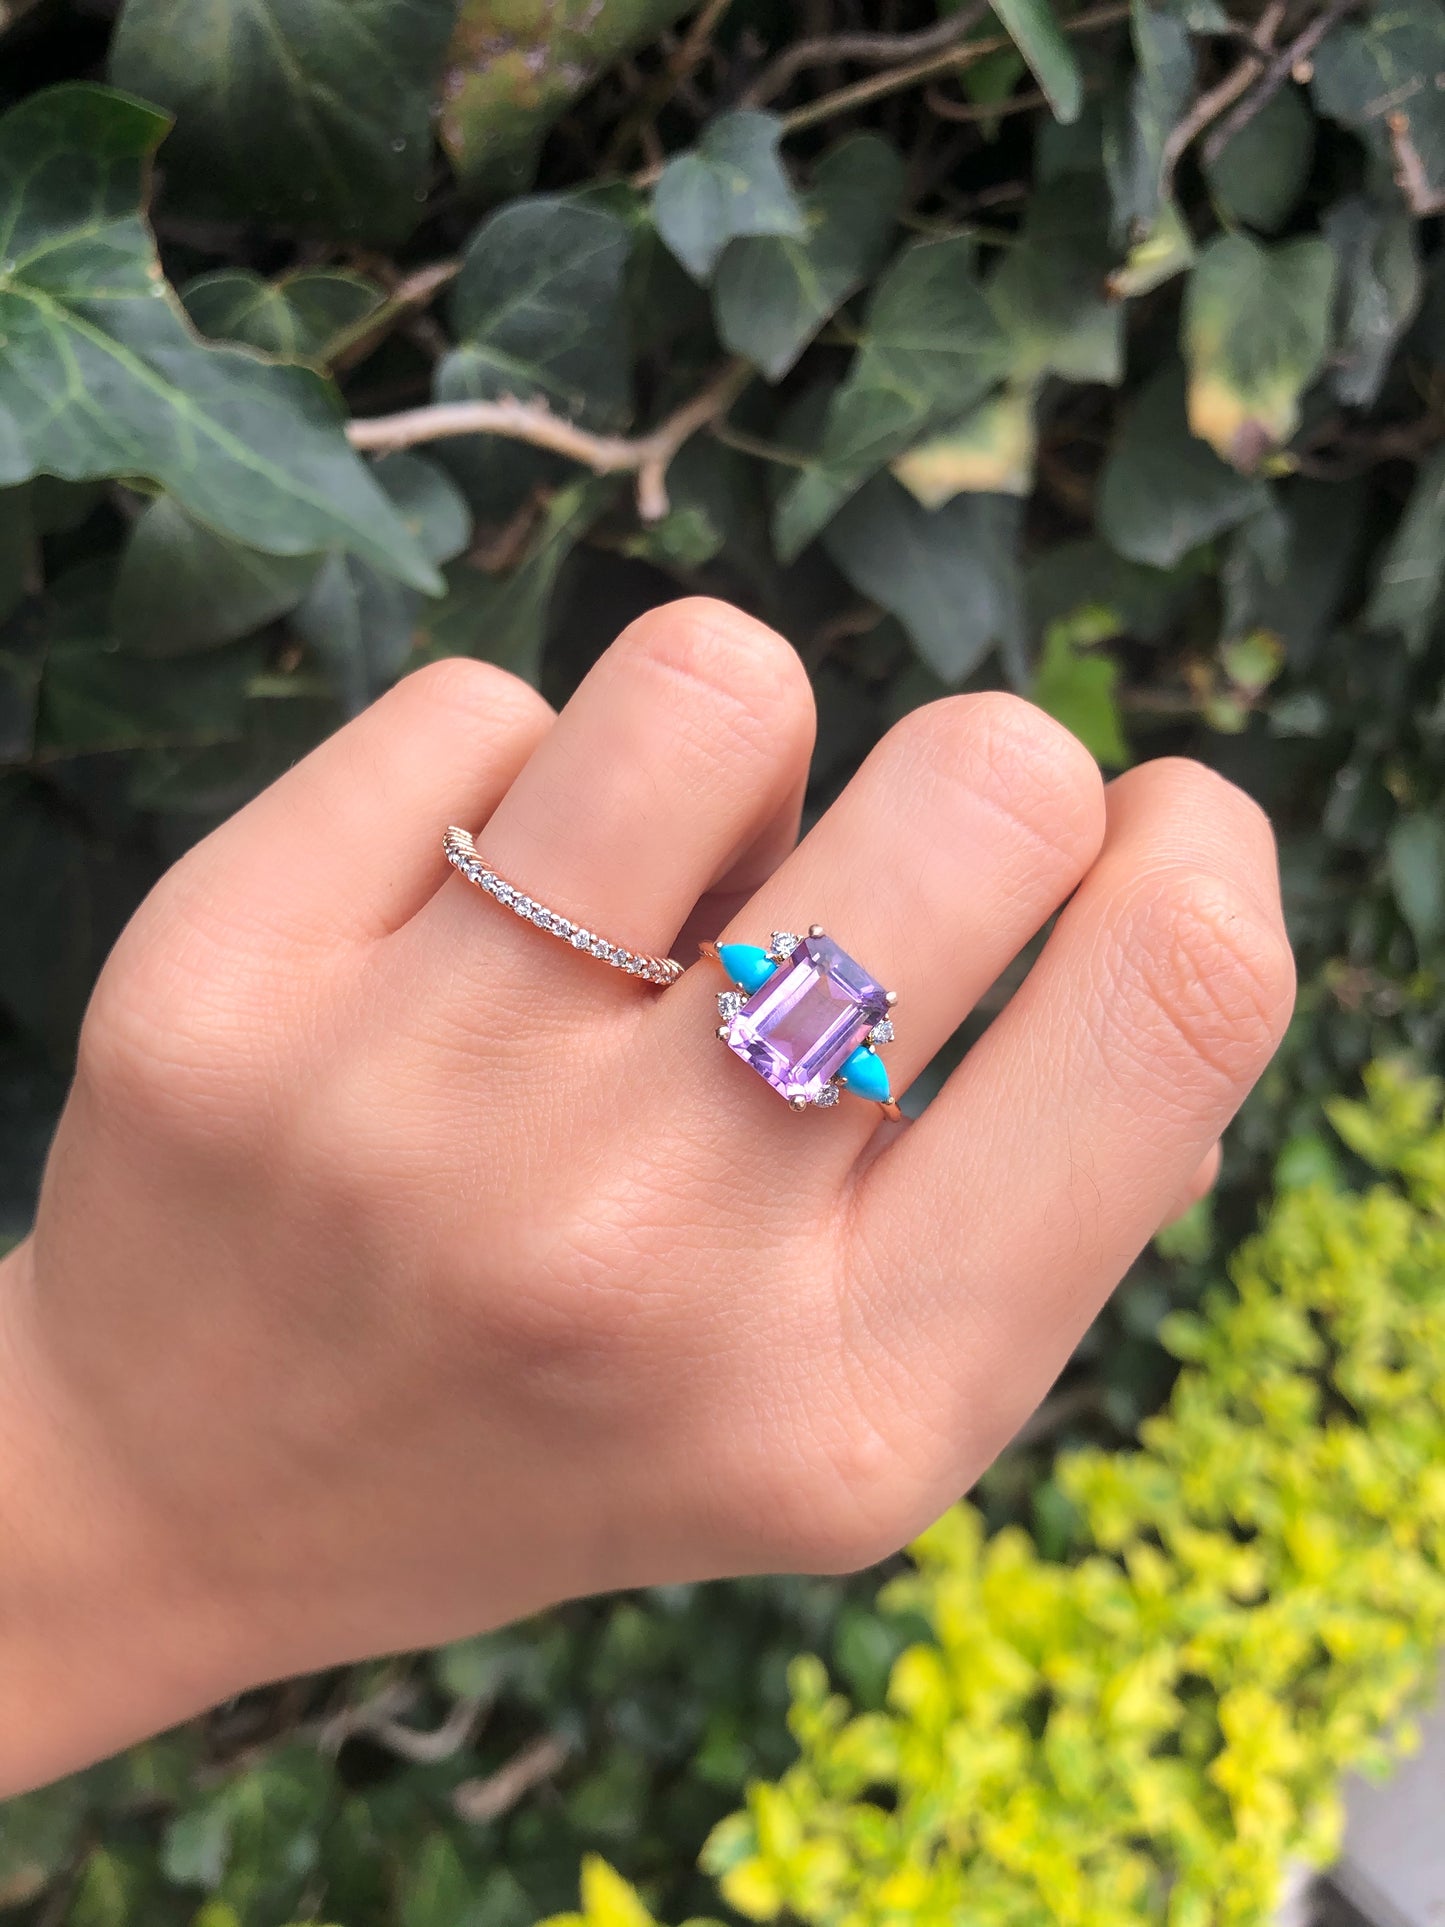 Amethyst Ring with Turquoises and Diamonds